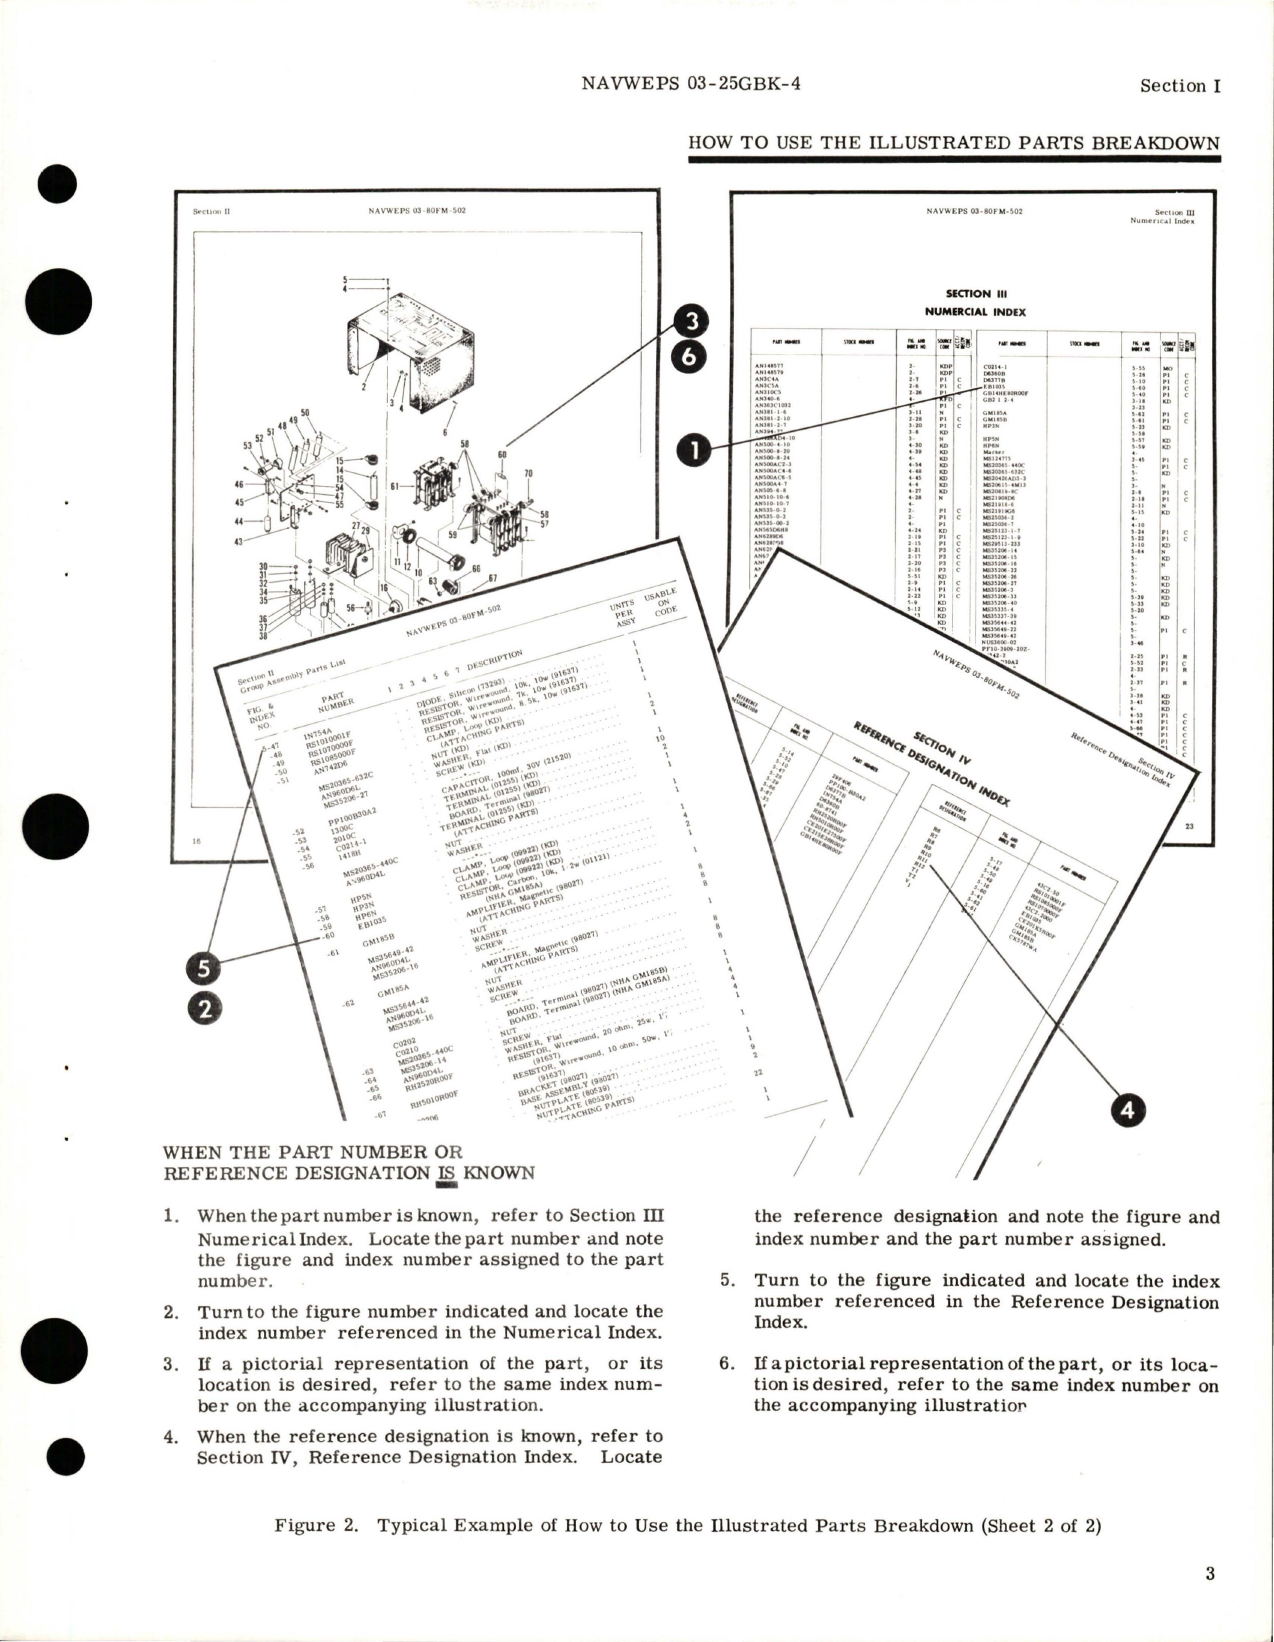 Sample page 7 from AirCorps Library document: Illustrated Parts Breakdown for Electro-Hydraulic Tandem Power Control Cylinder - Parts 16150-7, 16150-8, 16150-11, 16150-12, 16150-13, and 16150-14